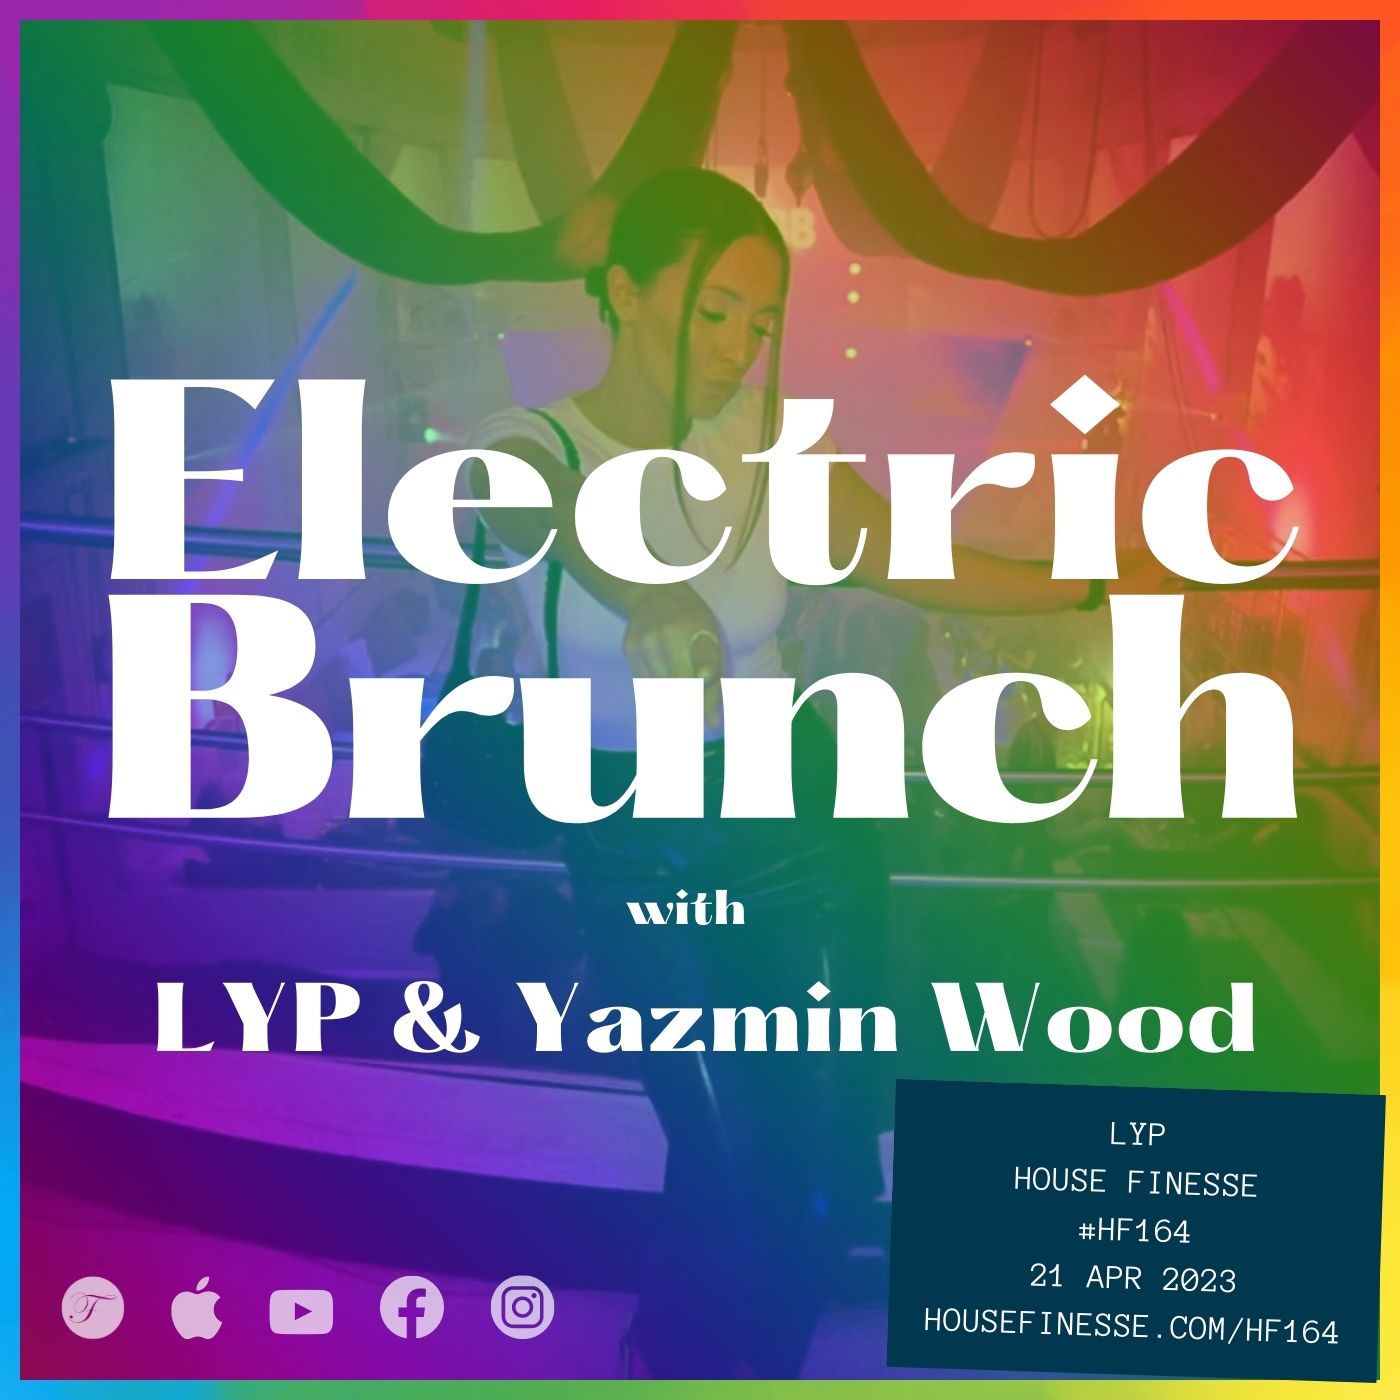 Electric Brunch with LYP & Yazmin Wood